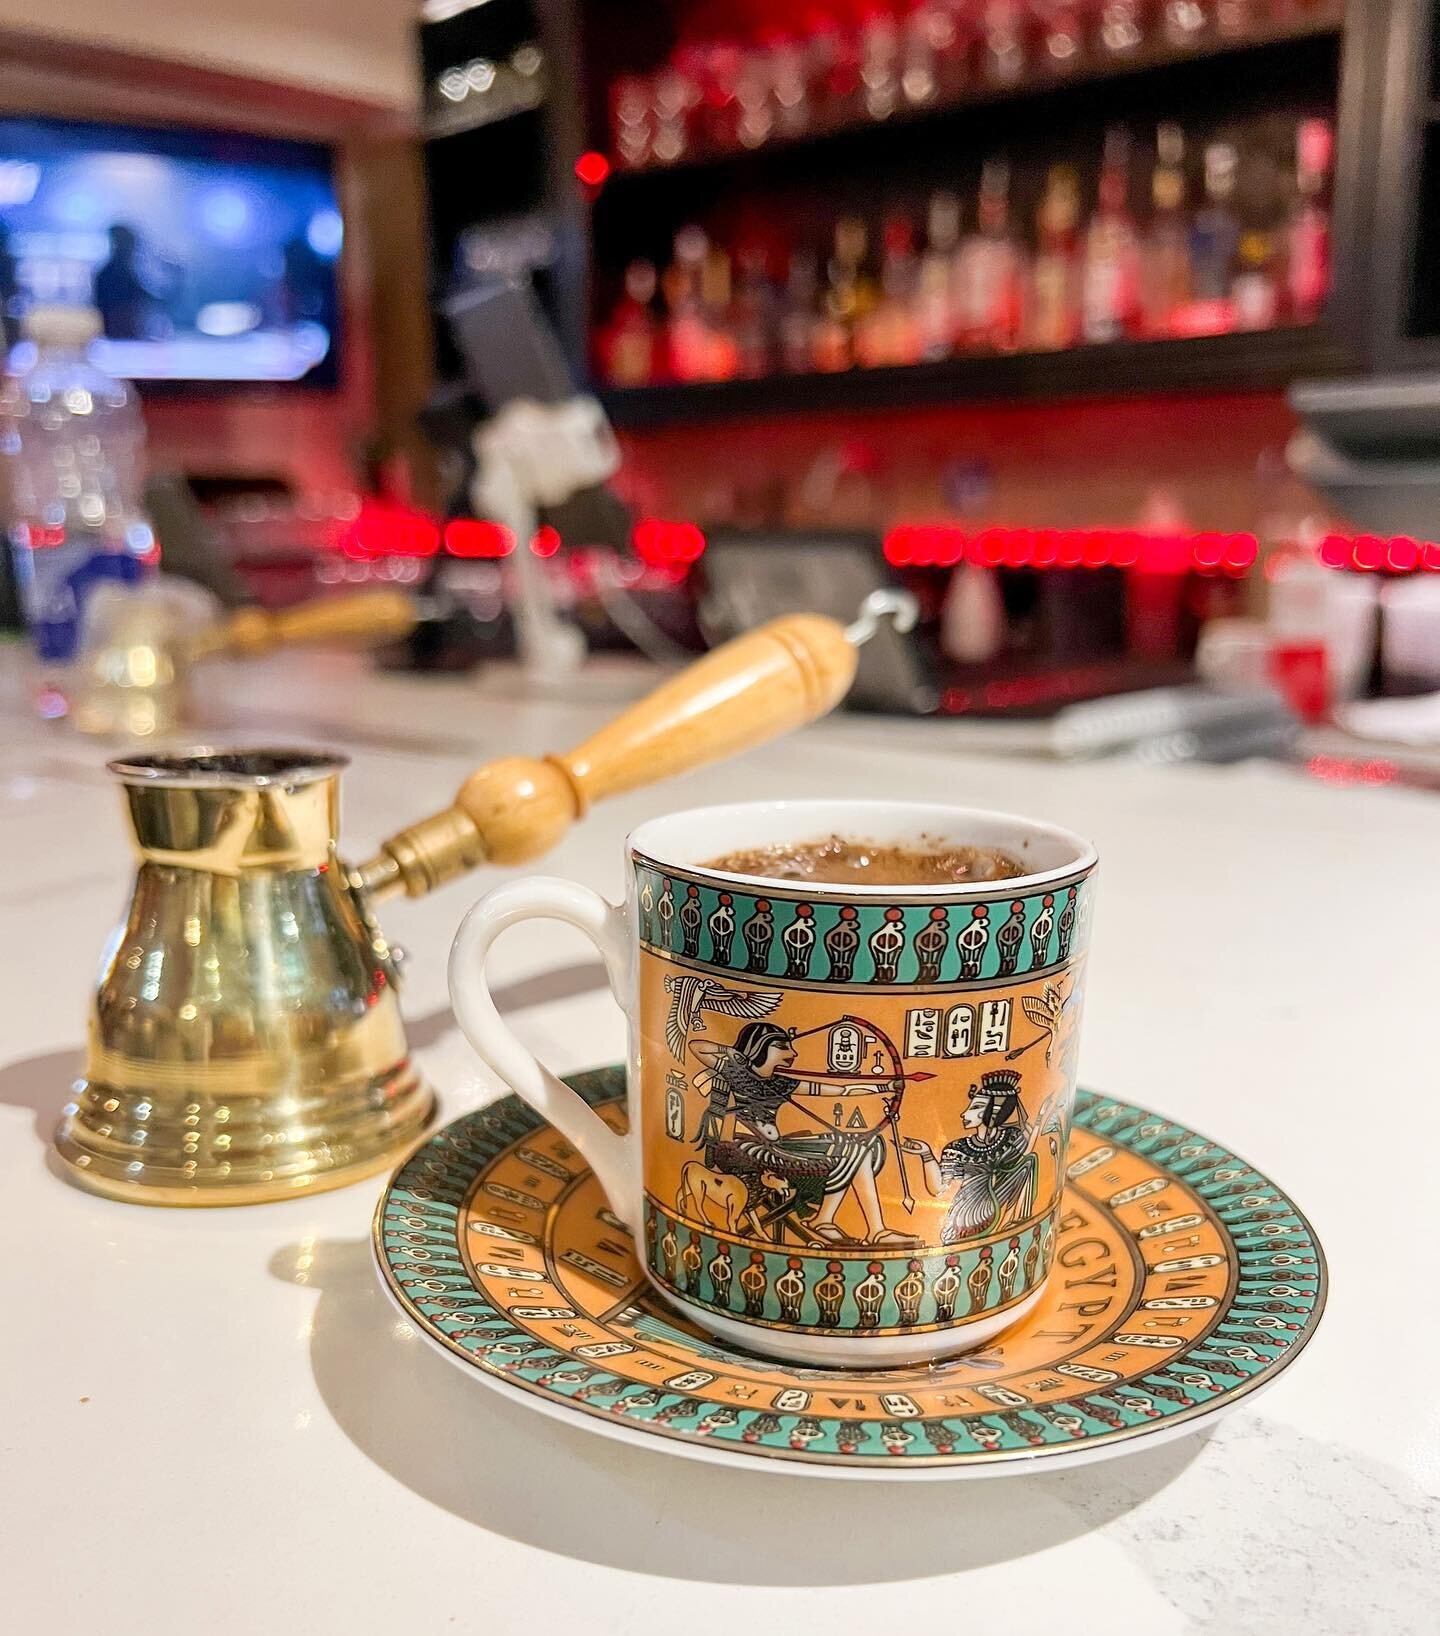 Turkish Coffee anyone???

Dine-in &bull; Take out &bull; Delivery &bull; Catering 
Sunday- Thursday 11am to 10pm
Friday- Saturday 12pm to 11pm 

#tastetoronto #mediterraneandood #food #to_finest #tofinest #torontofoodblog #yyzfood #torontorestaurants